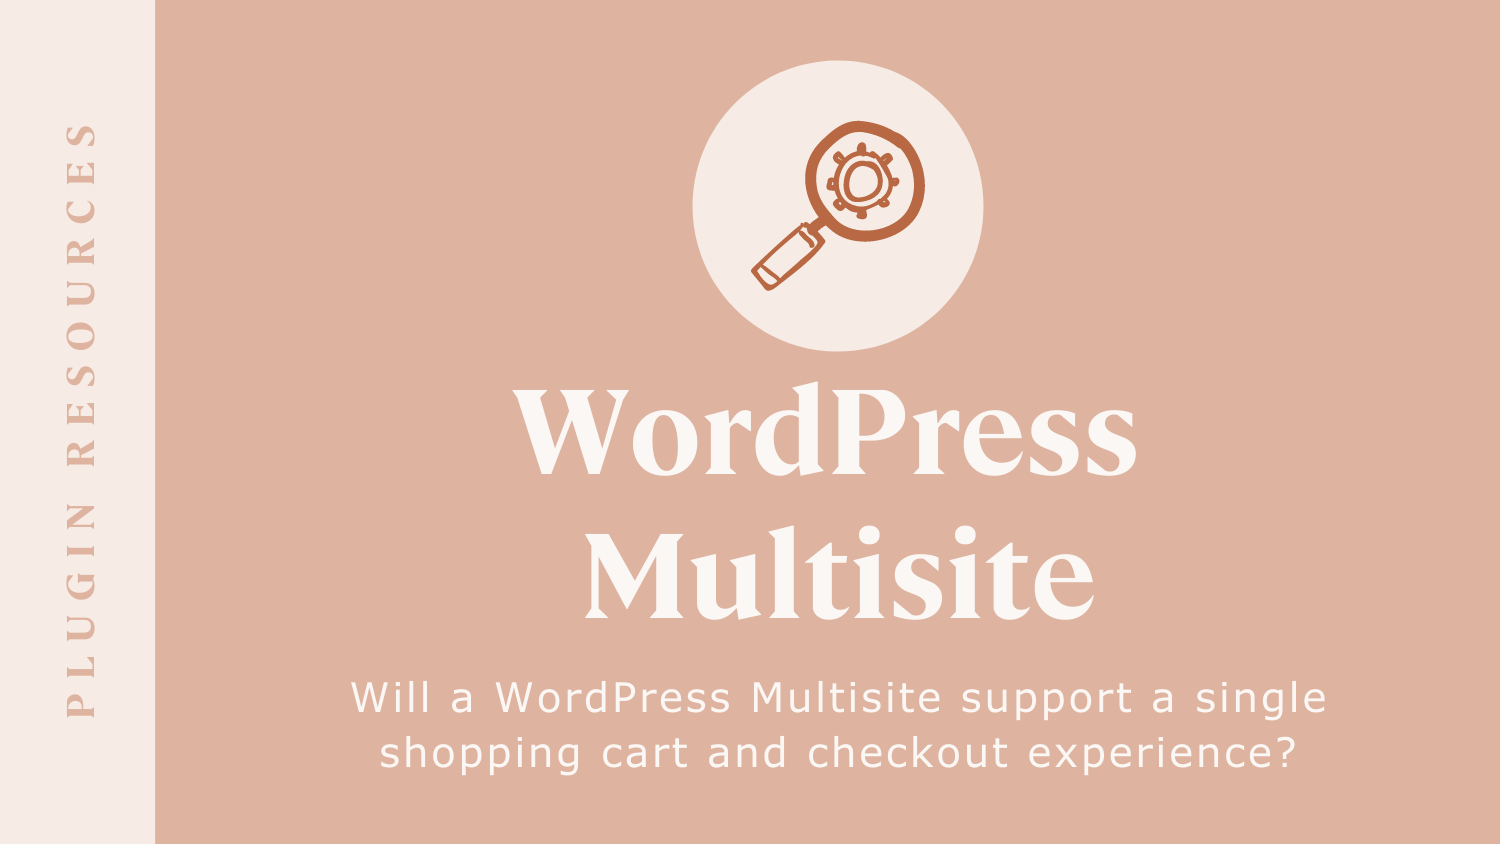 Will a WordPress Multisite support a single shopping cart and checkout experience?